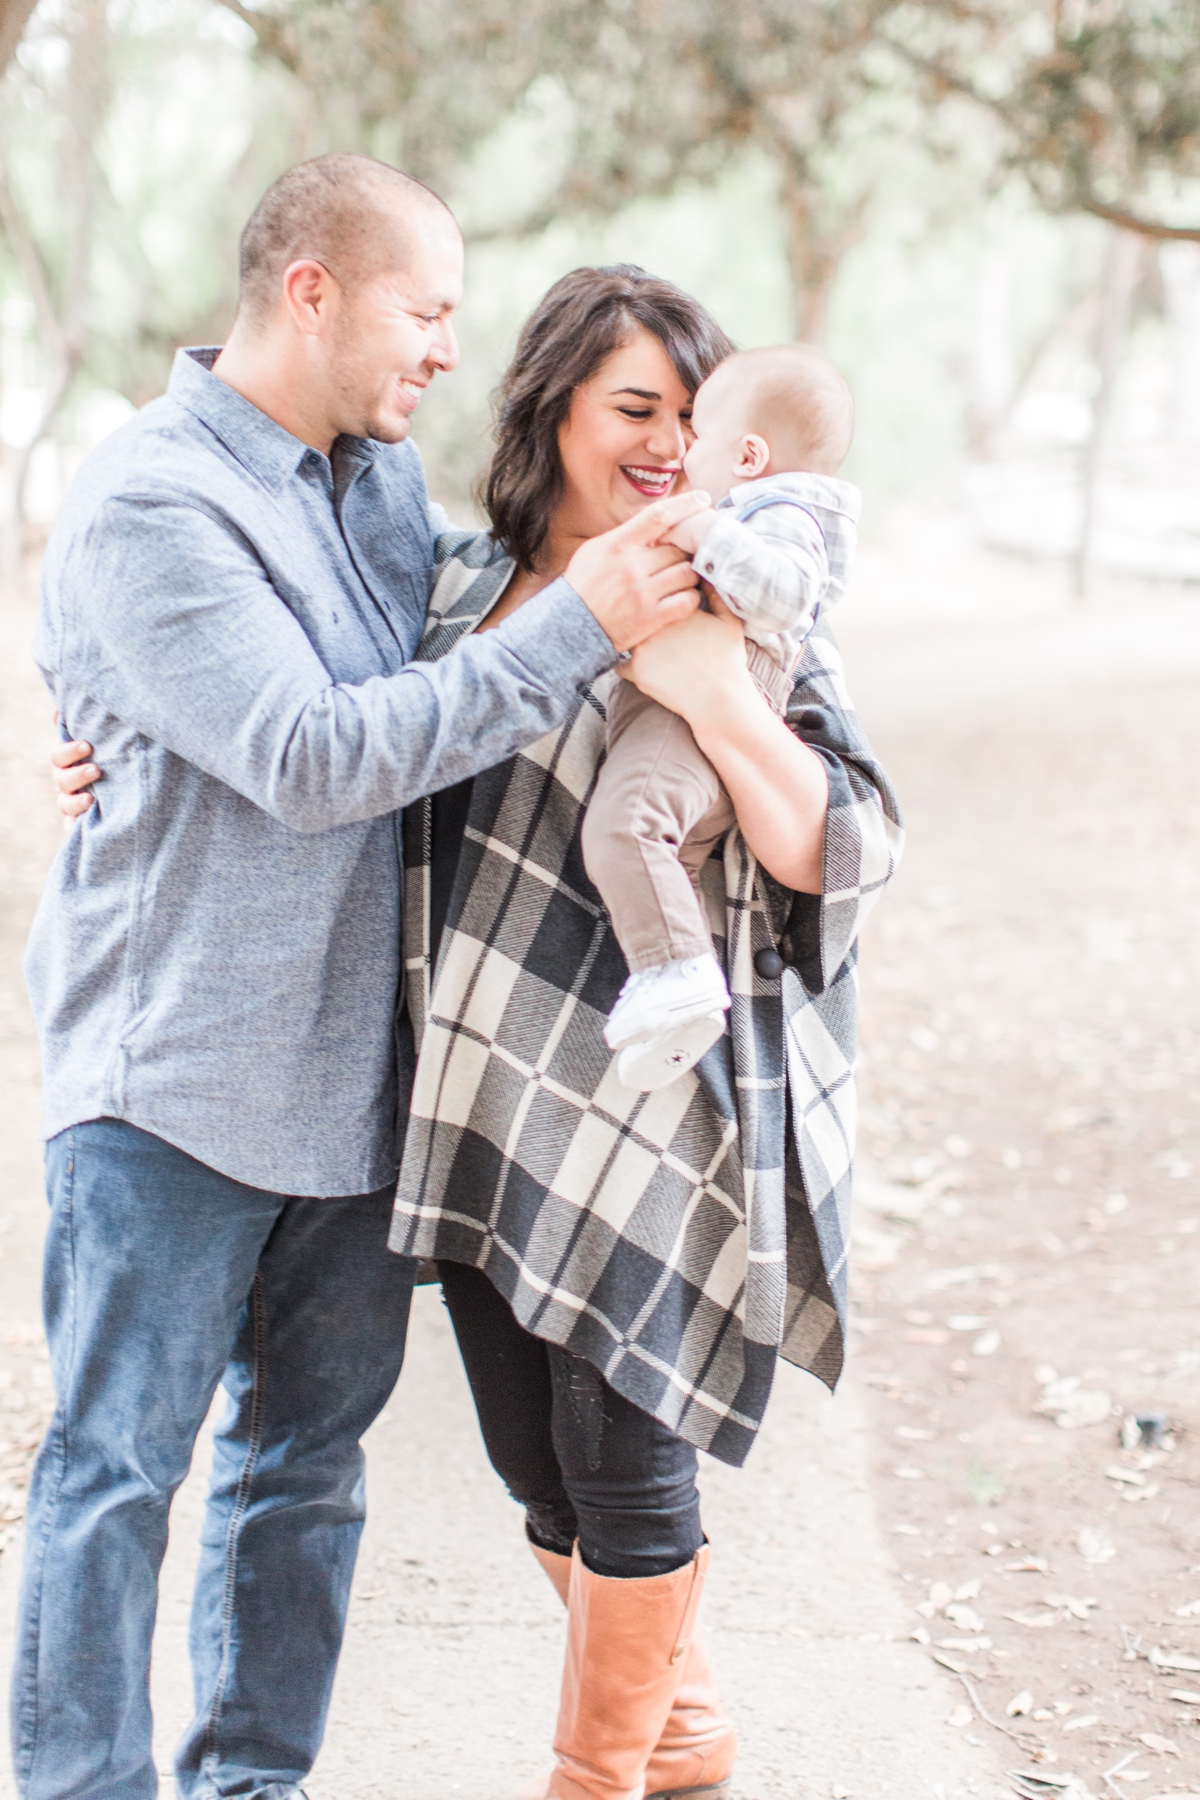 Family portrait session at Old Poway Park, San Diego. Family portraits by Jade & Brian Photography.